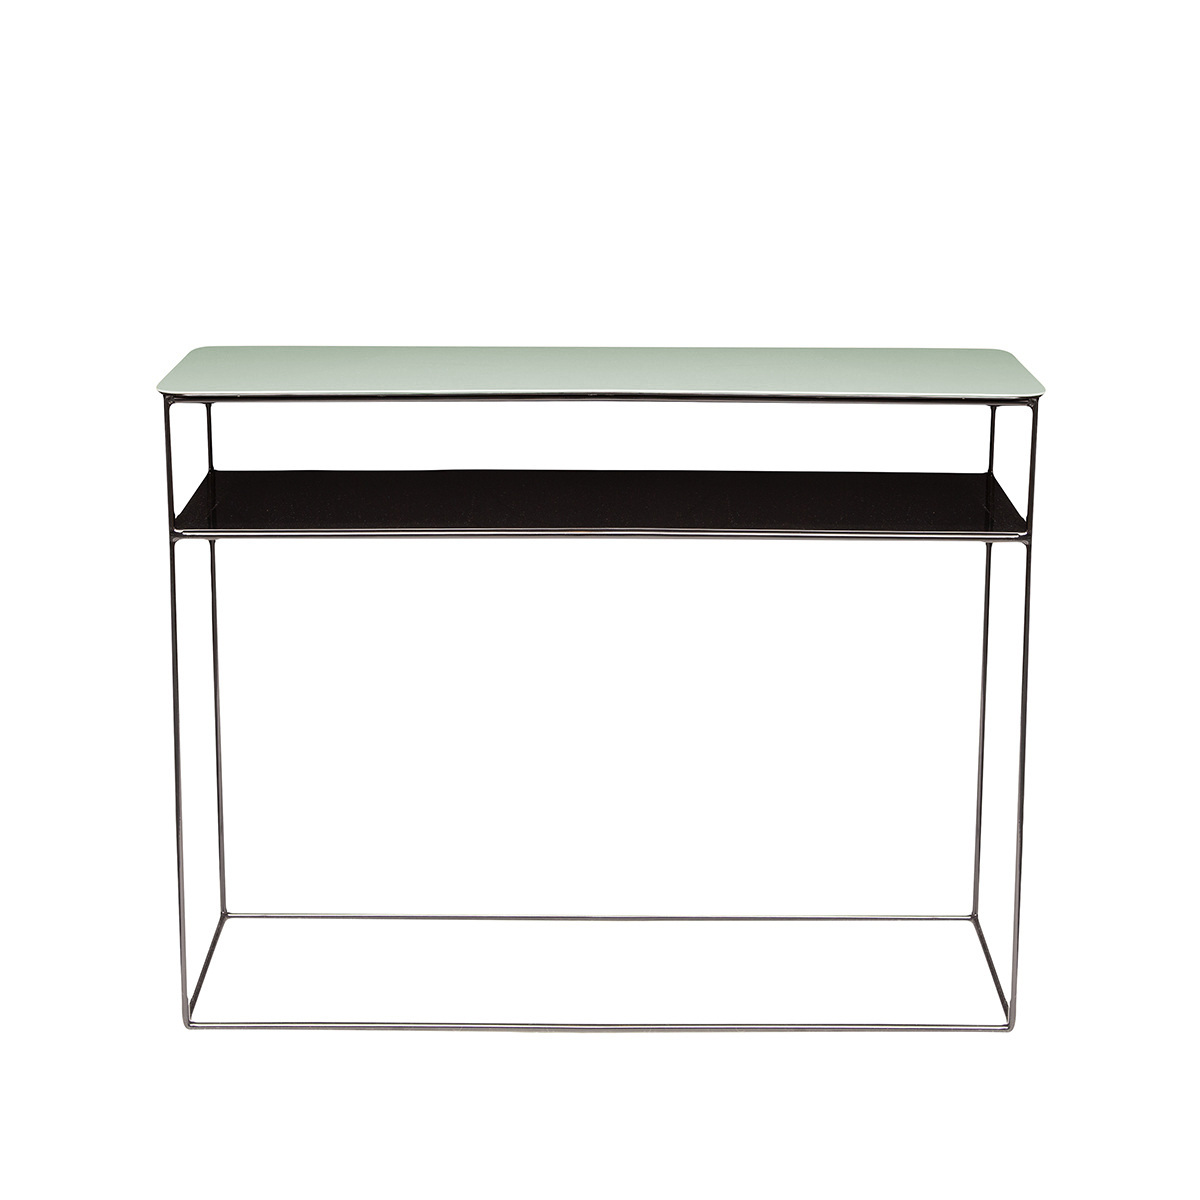 Console Table Double Jeu, Thyme / Black - W110 x D35 x H85 cm - Powder coated steel - image 1